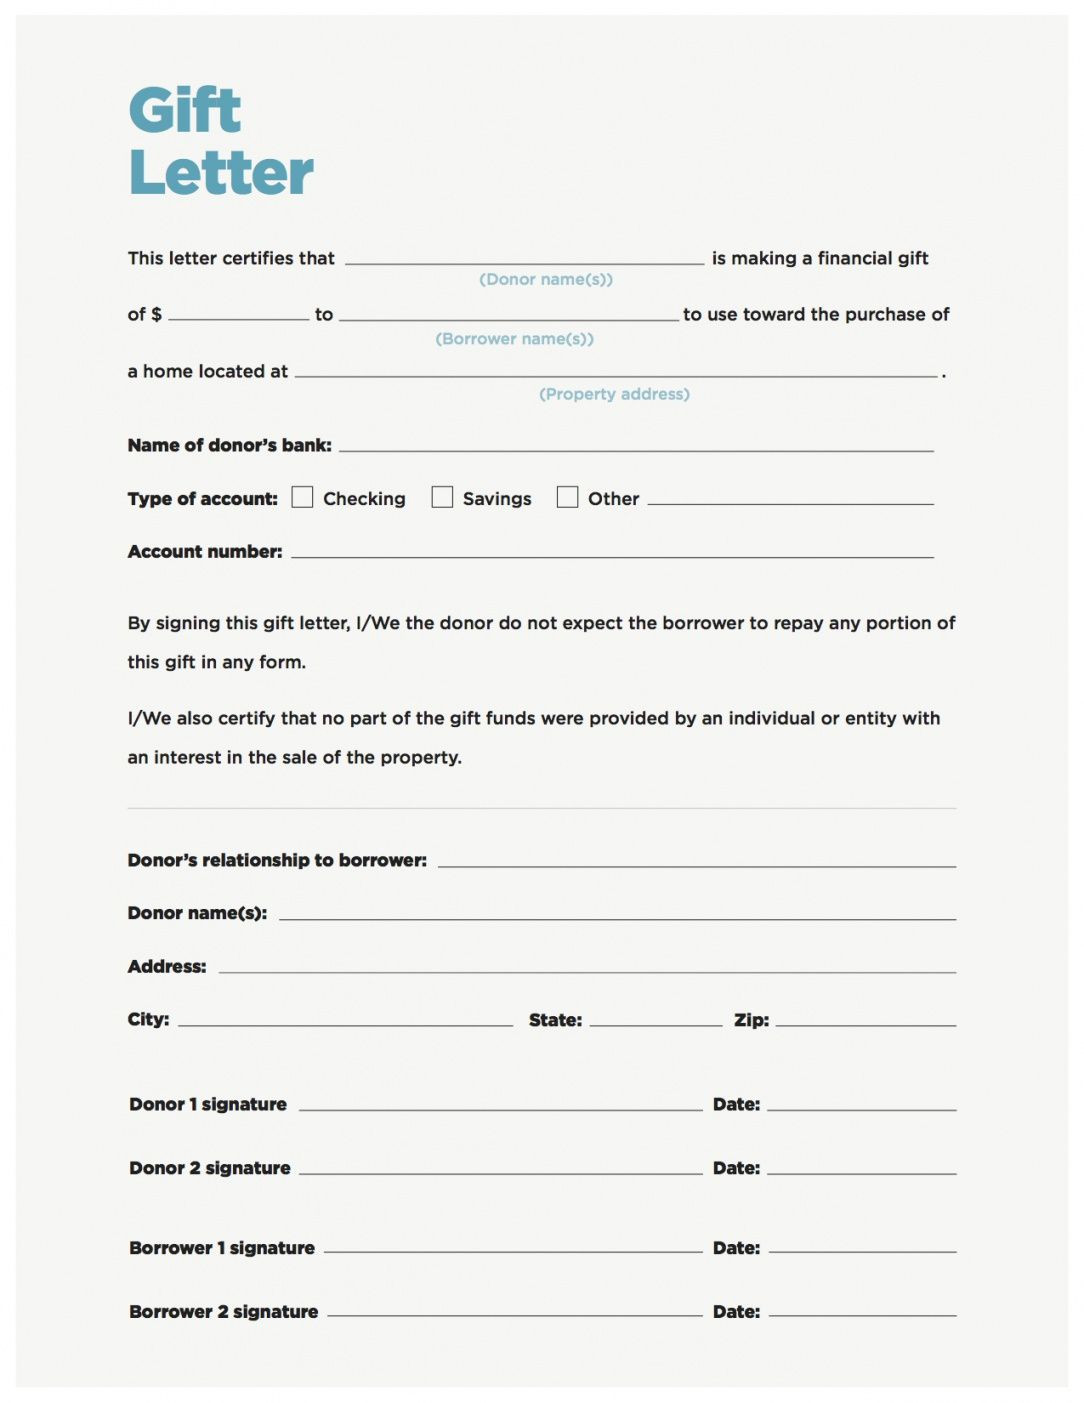 Gift Letter Template Word Editable 018 T Money Can Meet Your Down Payment Needs